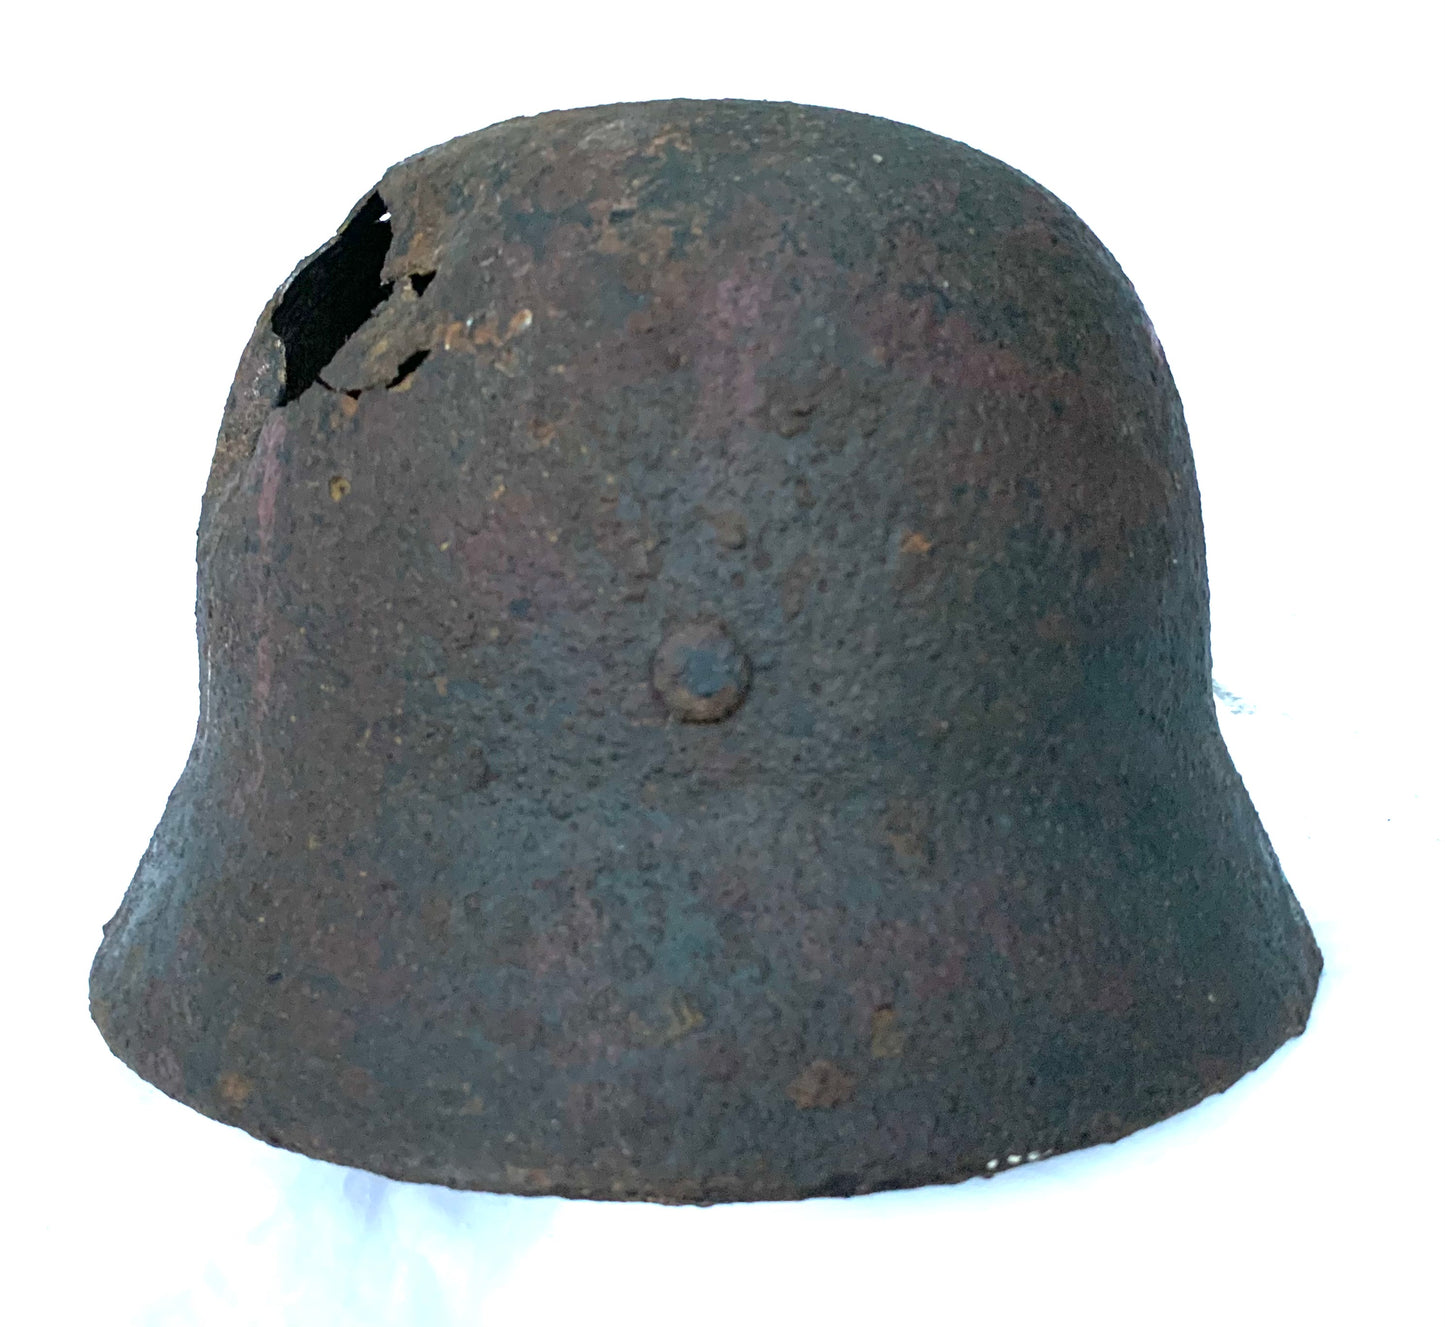 WW2 German M40 Single Decal Battle Damaged Camo Helmet recovered from the Eastern Front